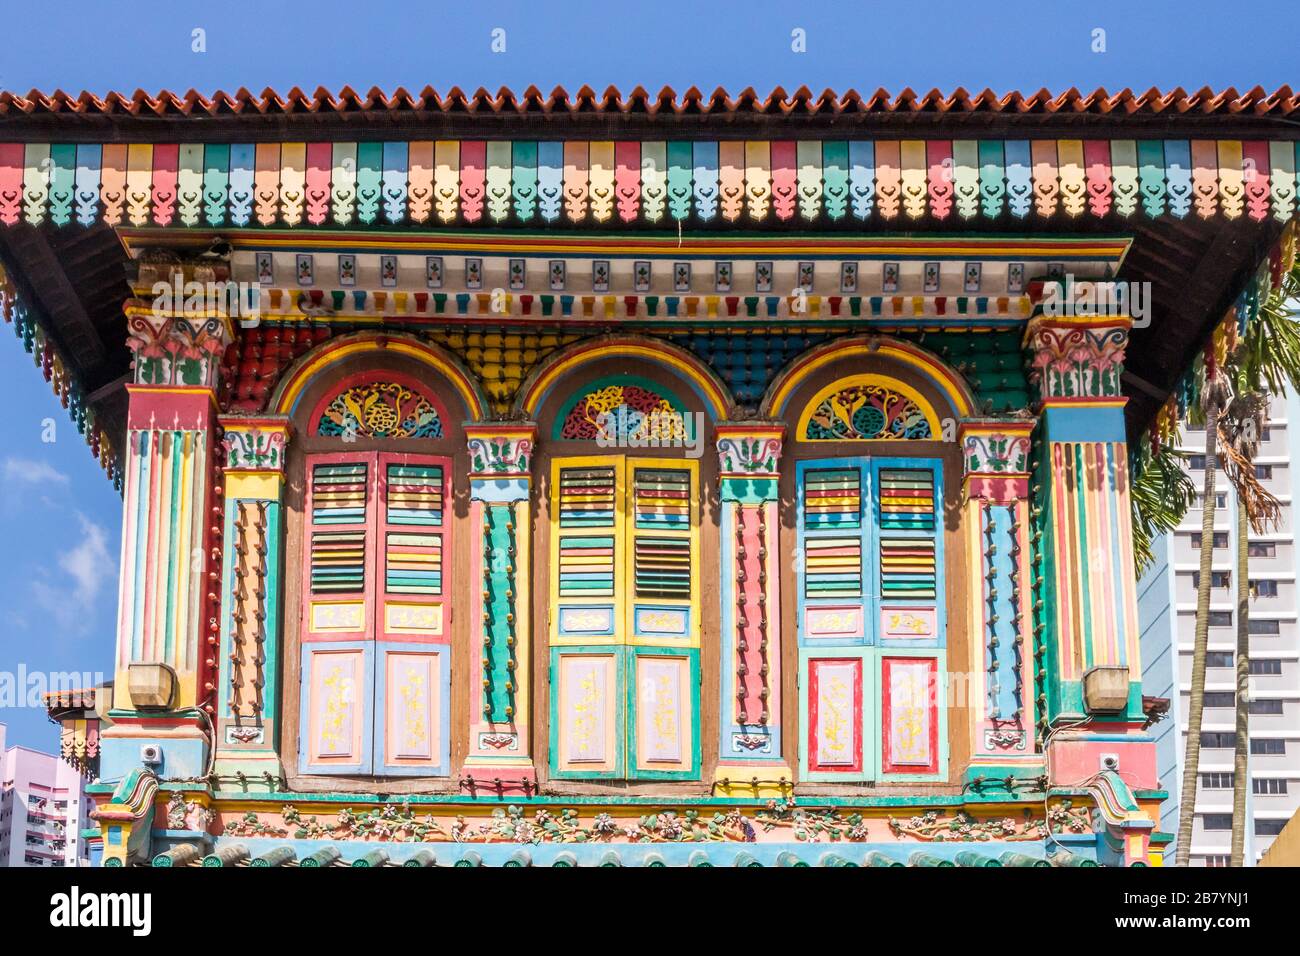 Colourful painted architecture in Little India, Singapore Stock Photo